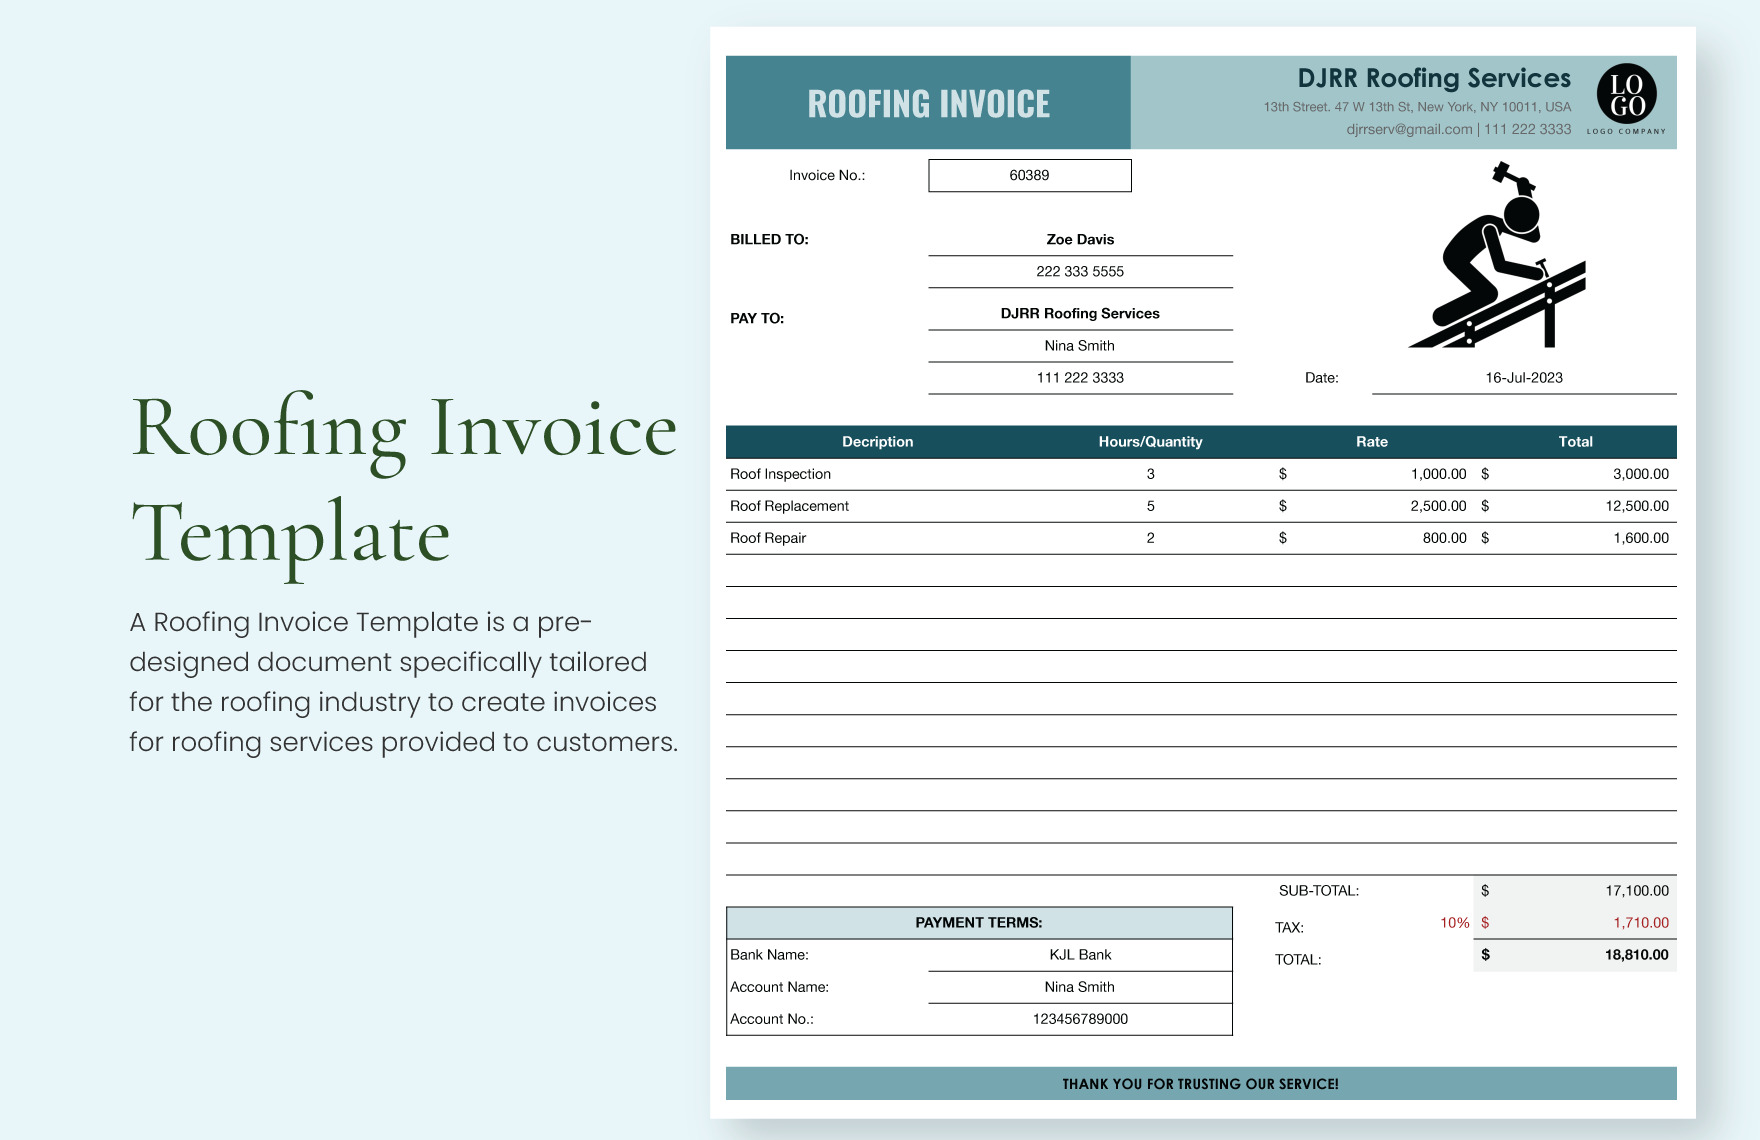 Roofing Invoice Template in Word, Google Docs, Excel, Google Sheets, Apple Pages, Apple Numbers